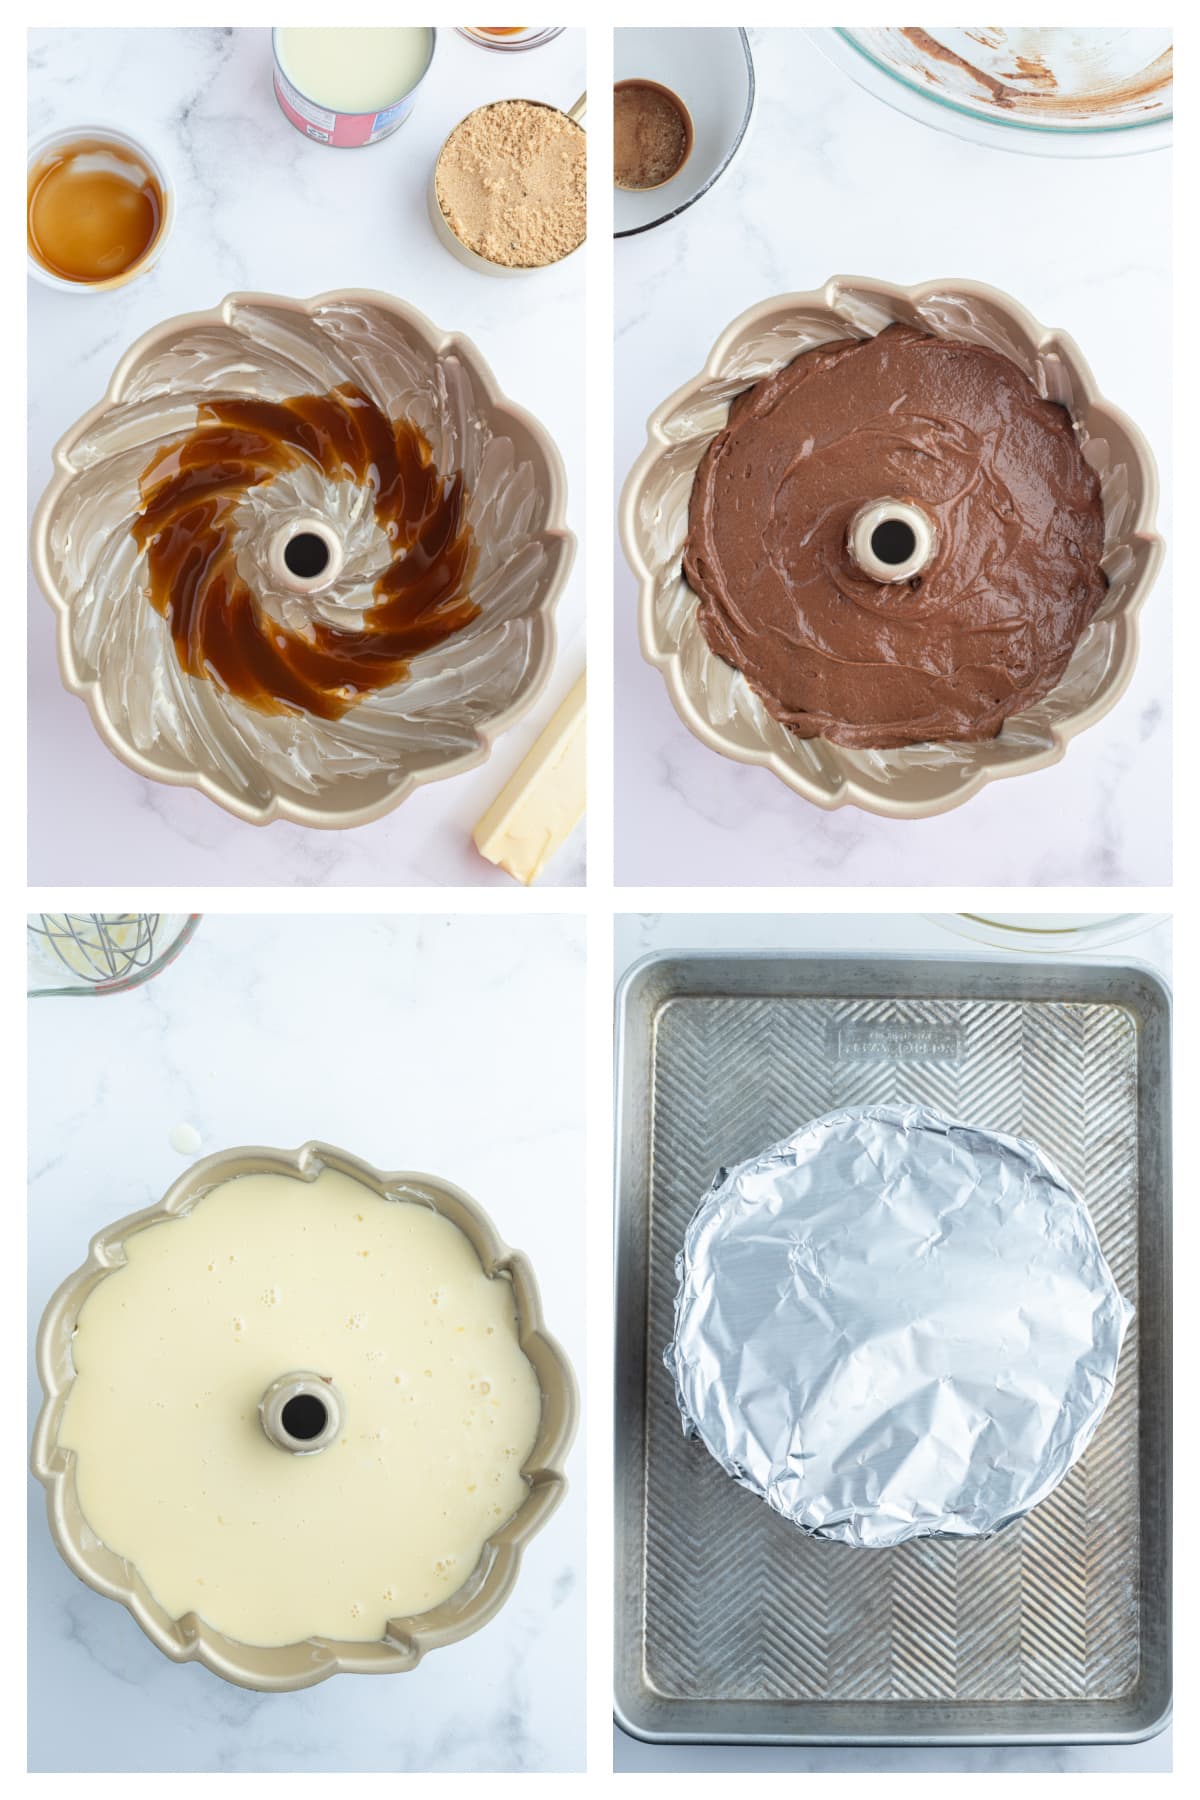 four photos showing how to make chocoflan